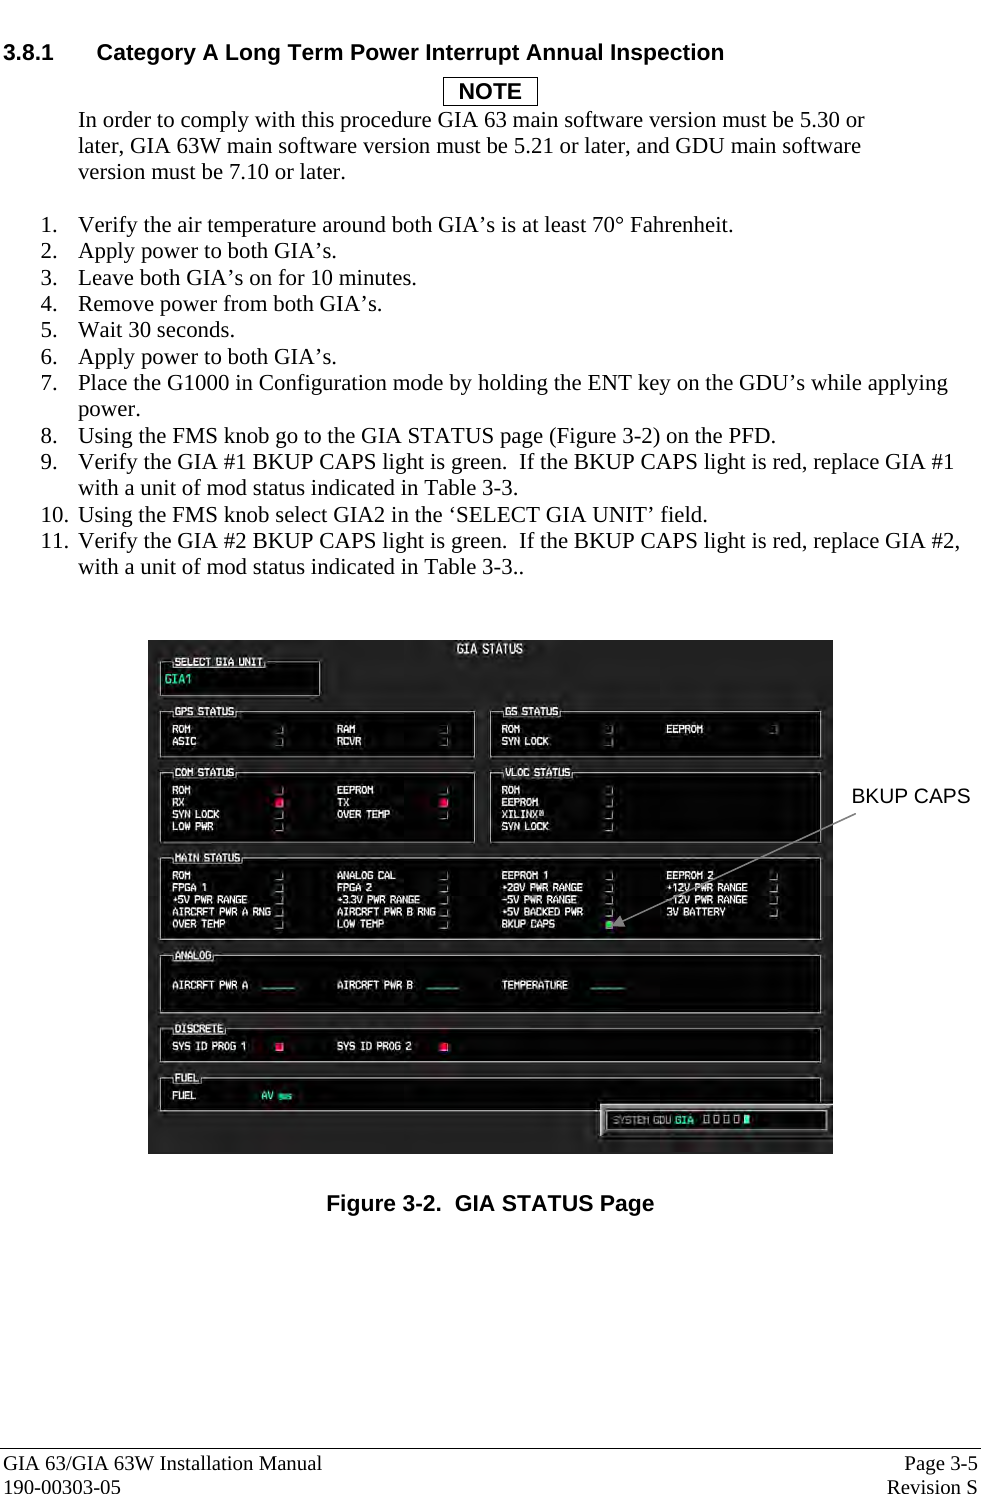  GIA 63/GIA 63W Installation Manual  Page 3-5  190-00303-05  Revision S 3.8.1  Category A Long Term Power Interrupt Annual Inspection NOTE In order to comply with this procedure GIA 63 main software version must be 5.30 or later, GIA 63W main software version must be 5.21 or later, and GDU main software version must be 7.10 or later.  1. Verify the air temperature around both GIA’s is at least 70° Fahrenheit. 2. Apply power to both GIA’s. 3. Leave both GIA’s on for 10 minutes. 4. Remove power from both GIA’s. 5. Wait 30 seconds. 6. Apply power to both GIA’s. 7. Place the G1000 in Configuration mode by holding the ENT key on the GDU’s while applying power. 8. Using the FMS knob go to the GIA STATUS page (Figure 3-2) on the PFD. 9. Verify the GIA #1 BKUP CAPS light is green.  If the BKUP CAPS light is red, replace GIA #1 with a unit of mod status indicated in Table 3-3. 10. Using the FMS knob select GIA2 in the ‘SELECT GIA UNIT’ field. 11. Verify the GIA #2 BKUP CAPS light is green.  If the BKUP CAPS light is red, replace GIA #2, with a unit of mod status indicated in Table 3-3..   Figure 3-2.  GIA STATUS Page BKUP CAPS